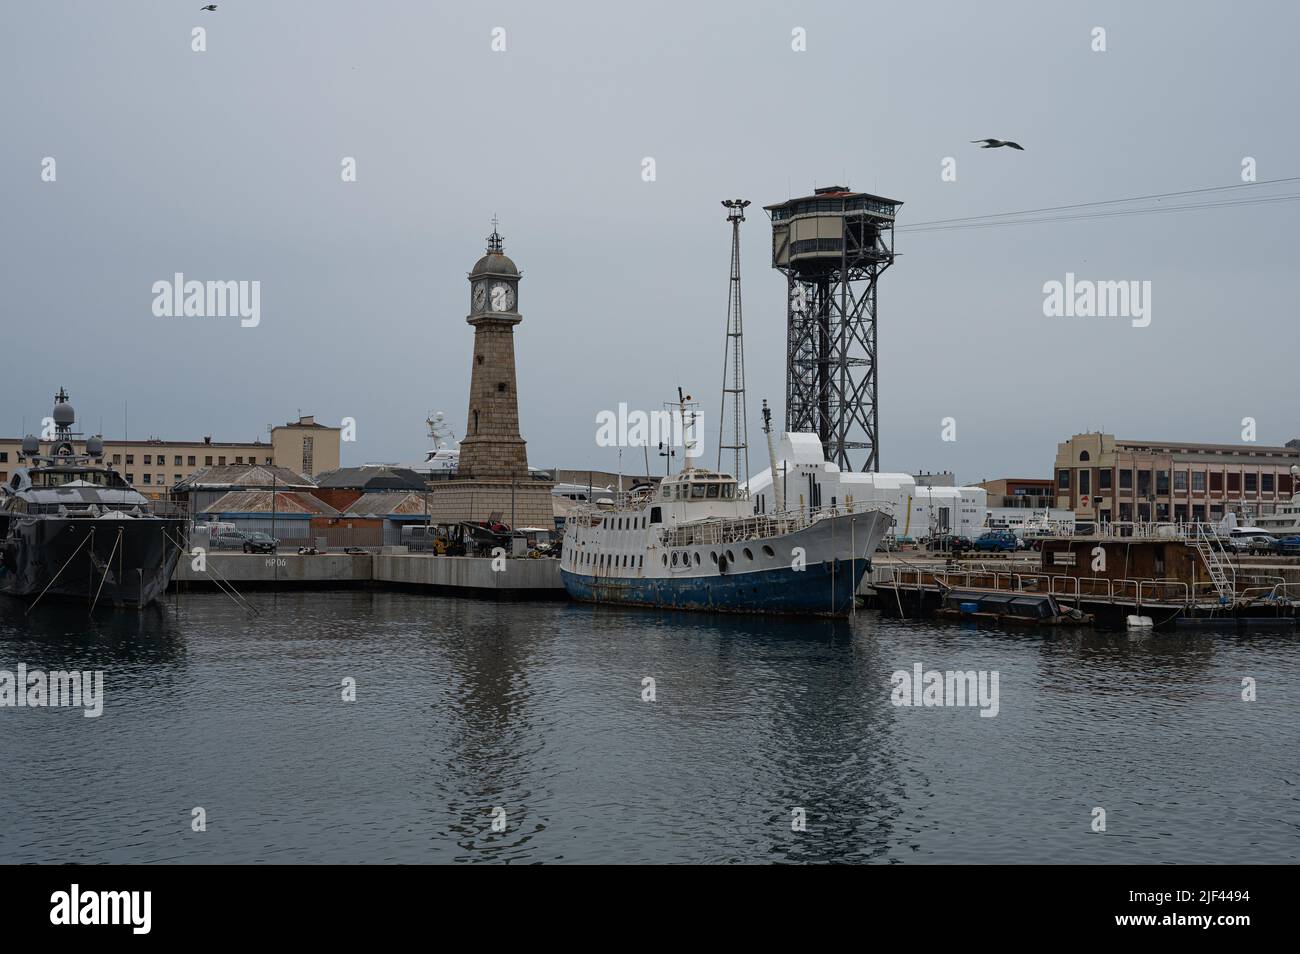 Photograph of the port of Barcelona with old ships, the cable car and the clock tower Stock Photo